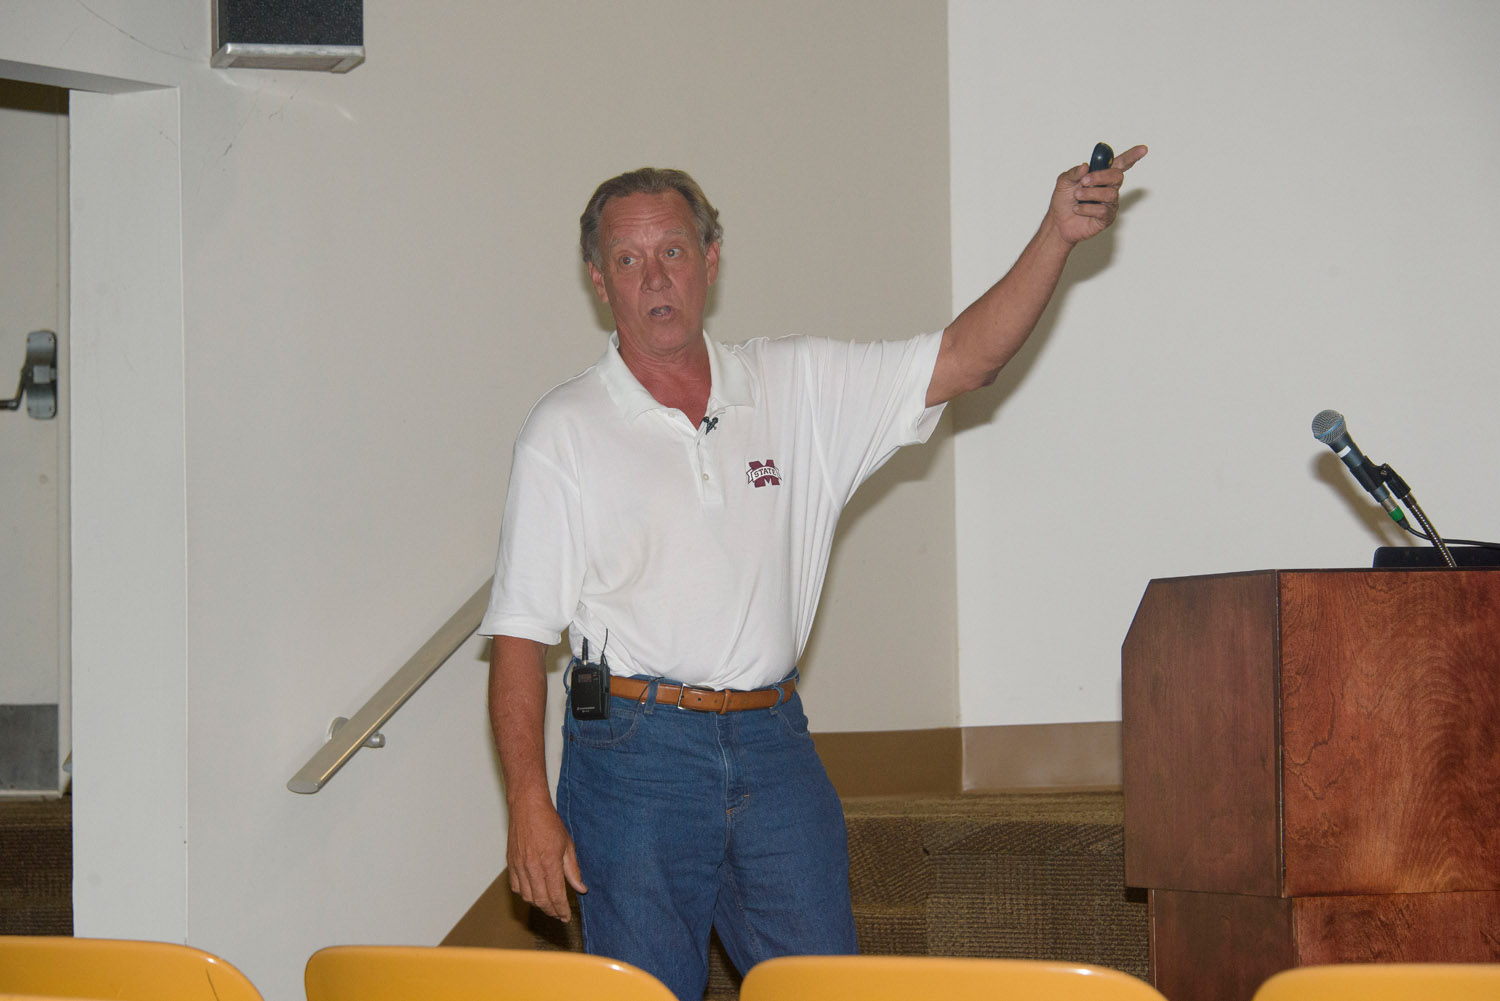 A man wears a white polo shirt with a Mississippi State University emblem on the right breast pocket, and his arm is lifted and pointing right.